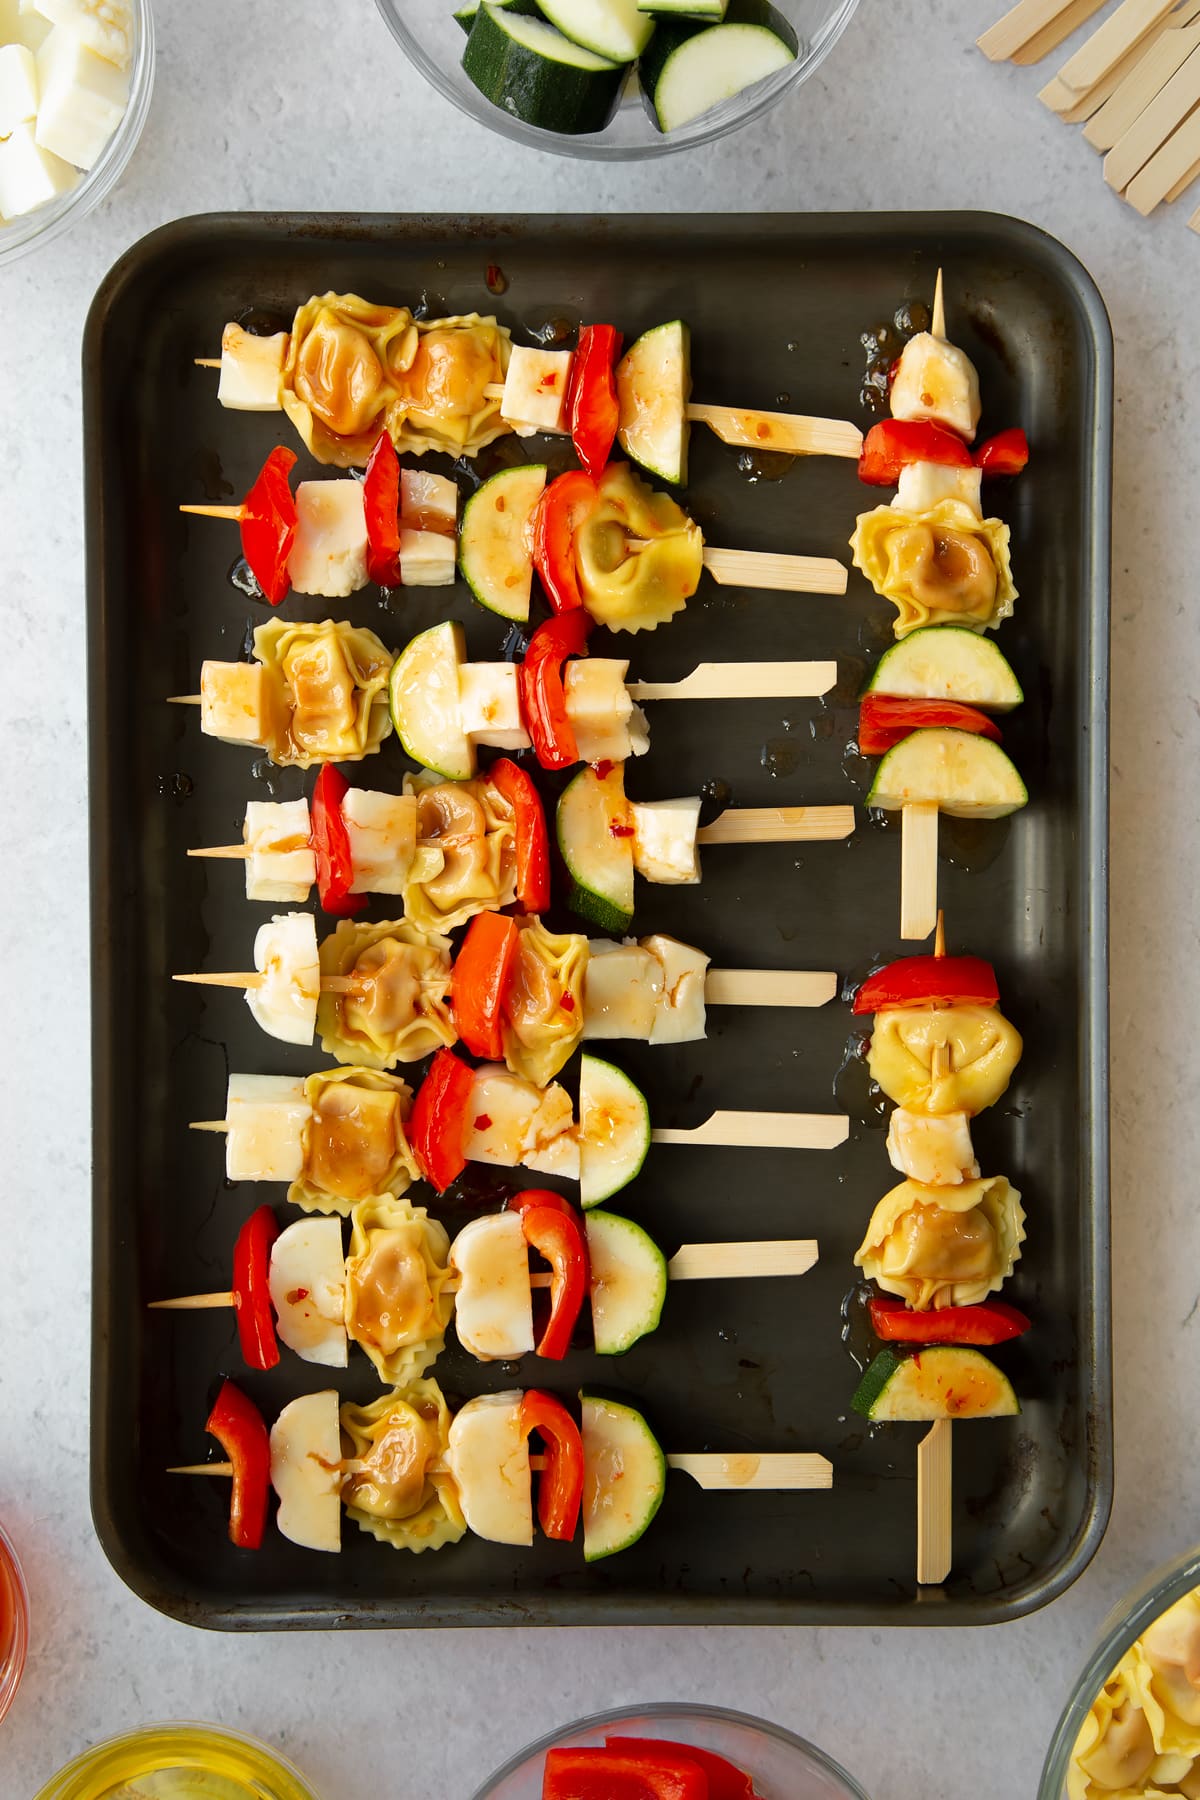 raw courgette, tortellini, halloumi and red pepper on wooden skewers placed on a baking tray drizzled in oil.